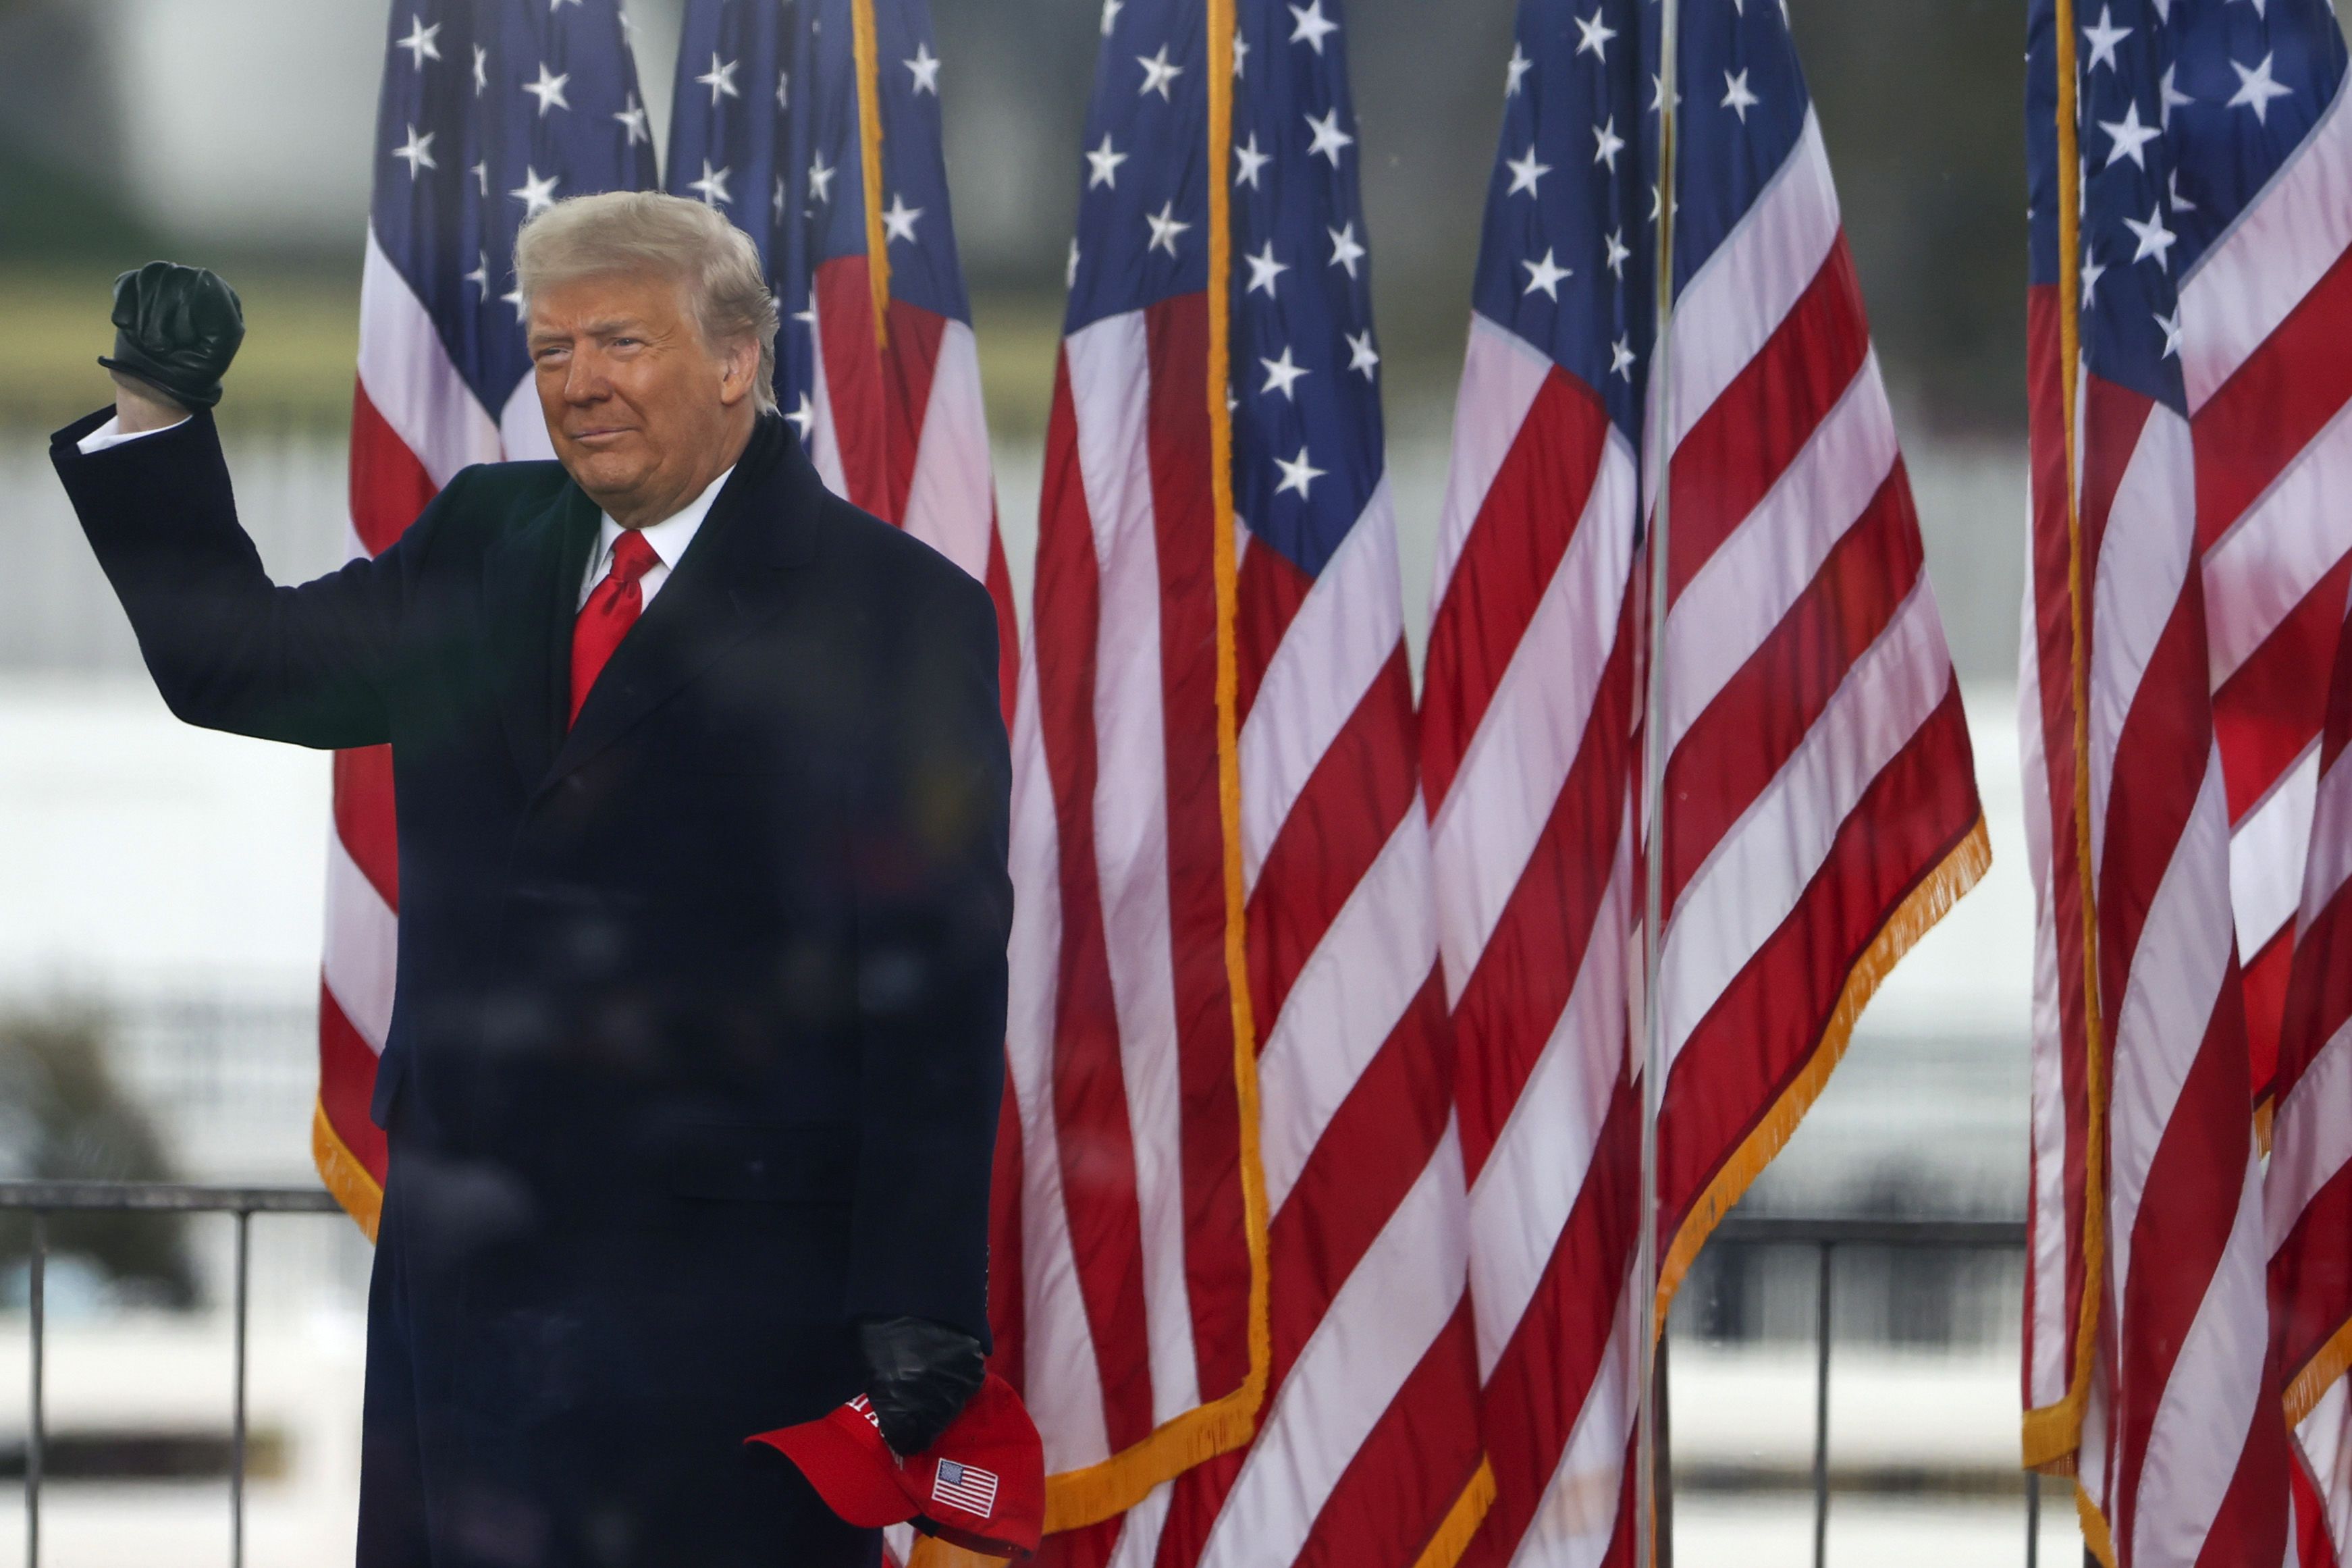 President Donald Trump arrives at the "Stop The Steal" Rally on January 6, 2021 in Washington, DC.